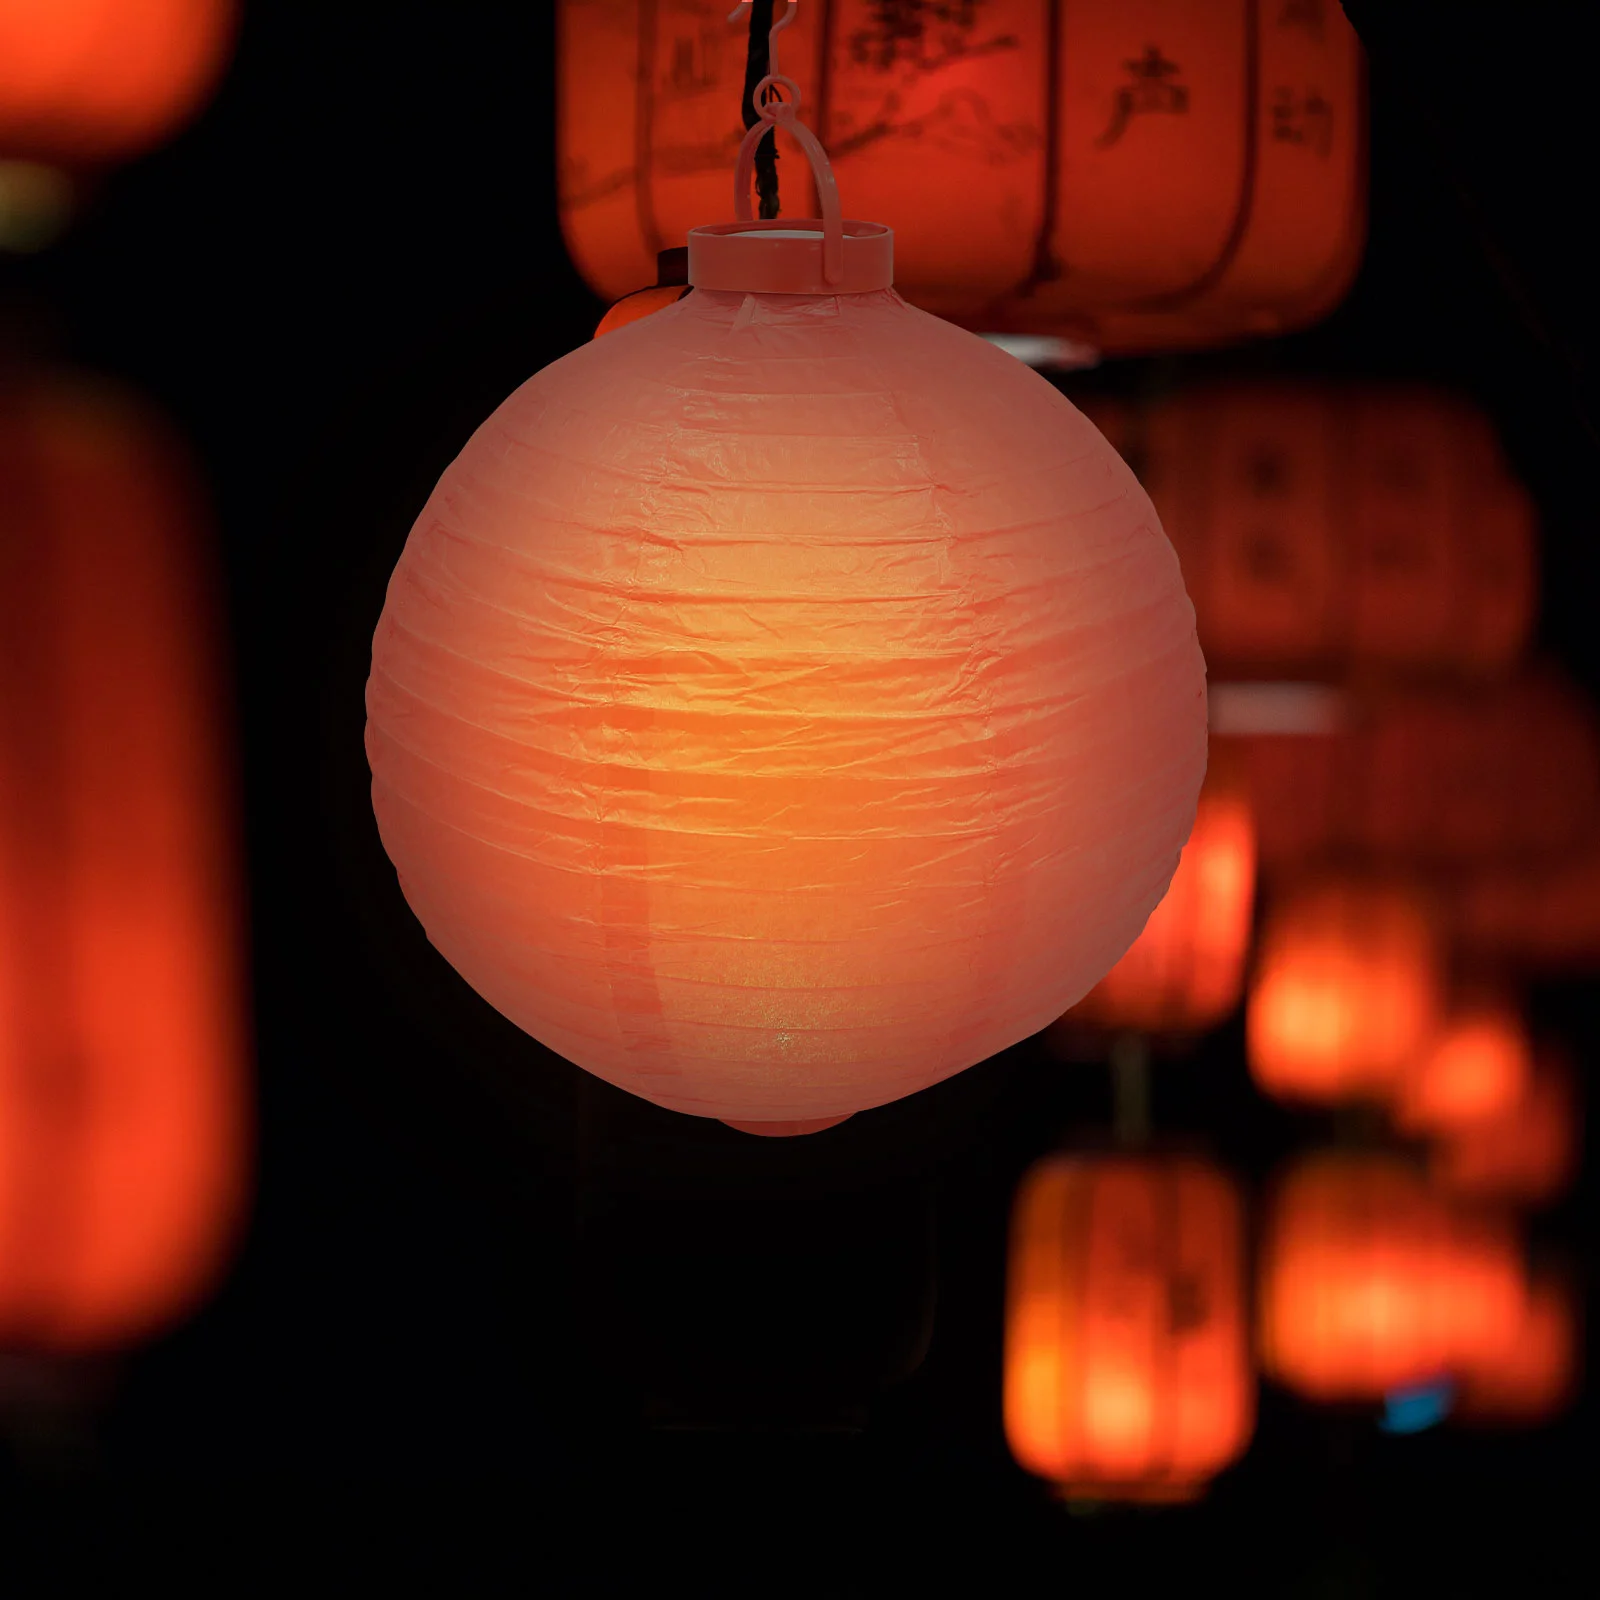 

Chinese Lanterns Red New Year Lantern Lighted Lunar Decoration Japanese Lamps Paper Spring Festival Withlight Lights Decorations